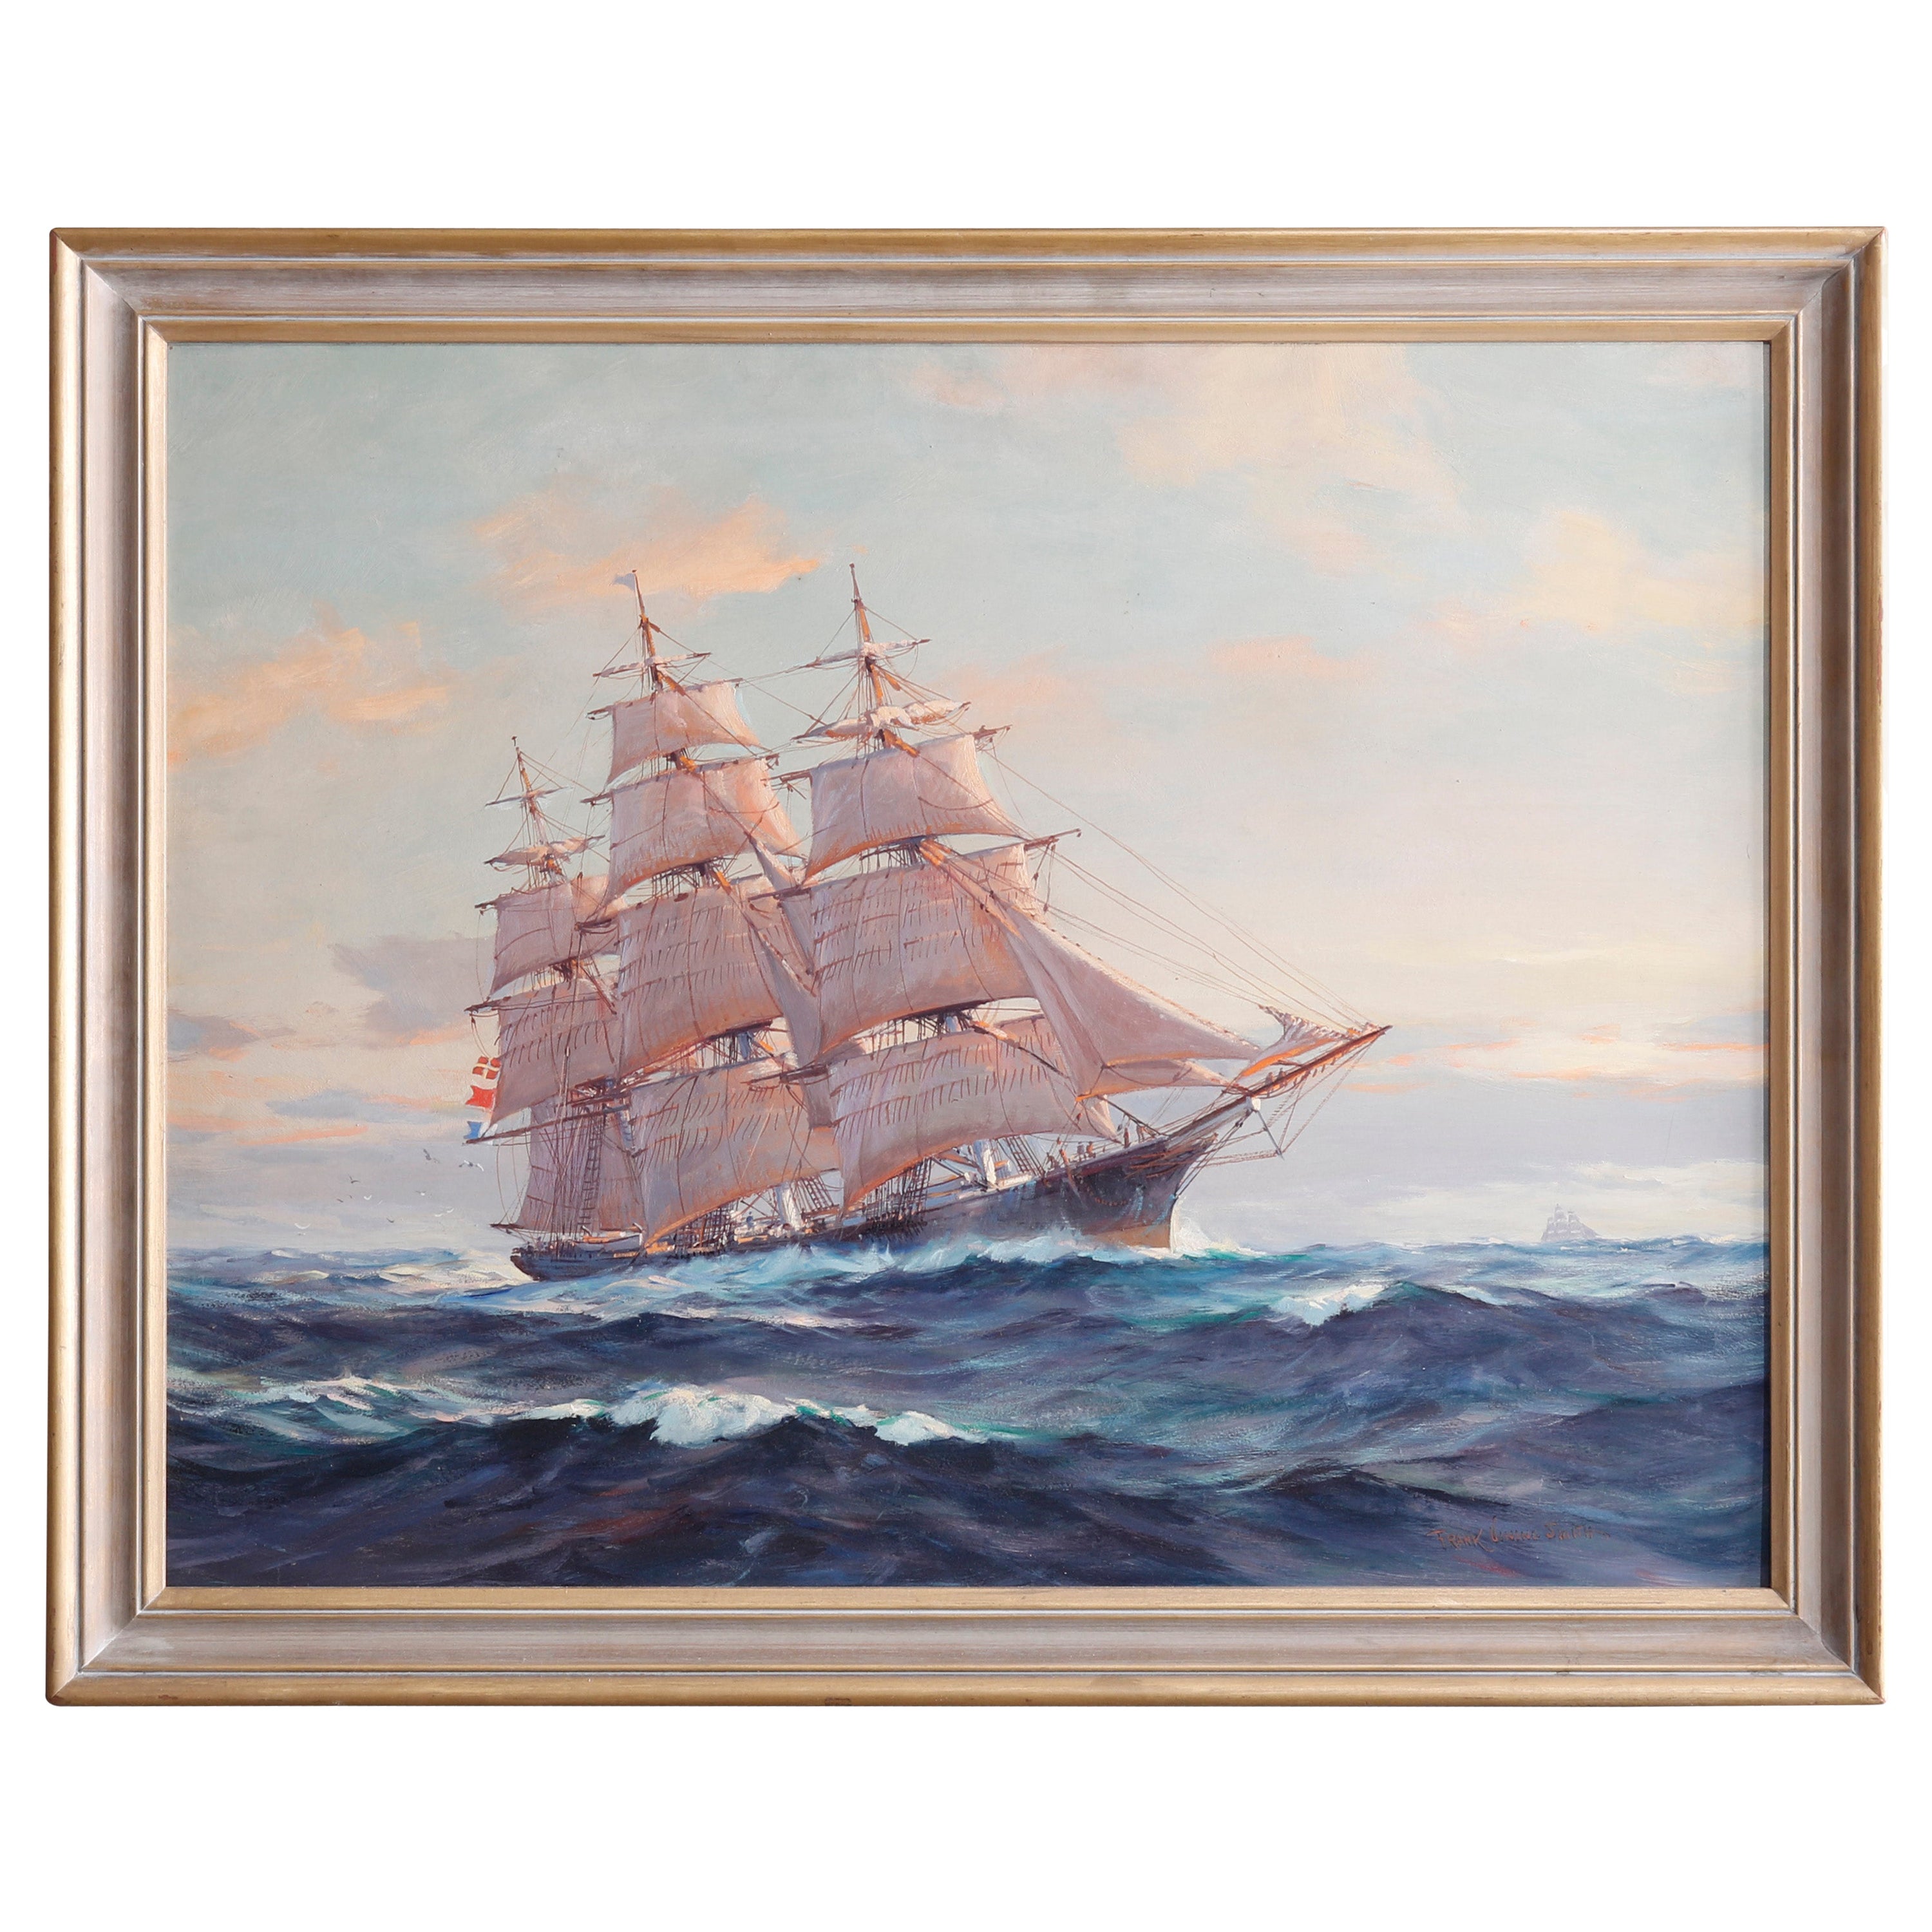 Maritime Oil Painting of Tall Mast Ship “Stag Hound” by Frank Vining Smith c1940